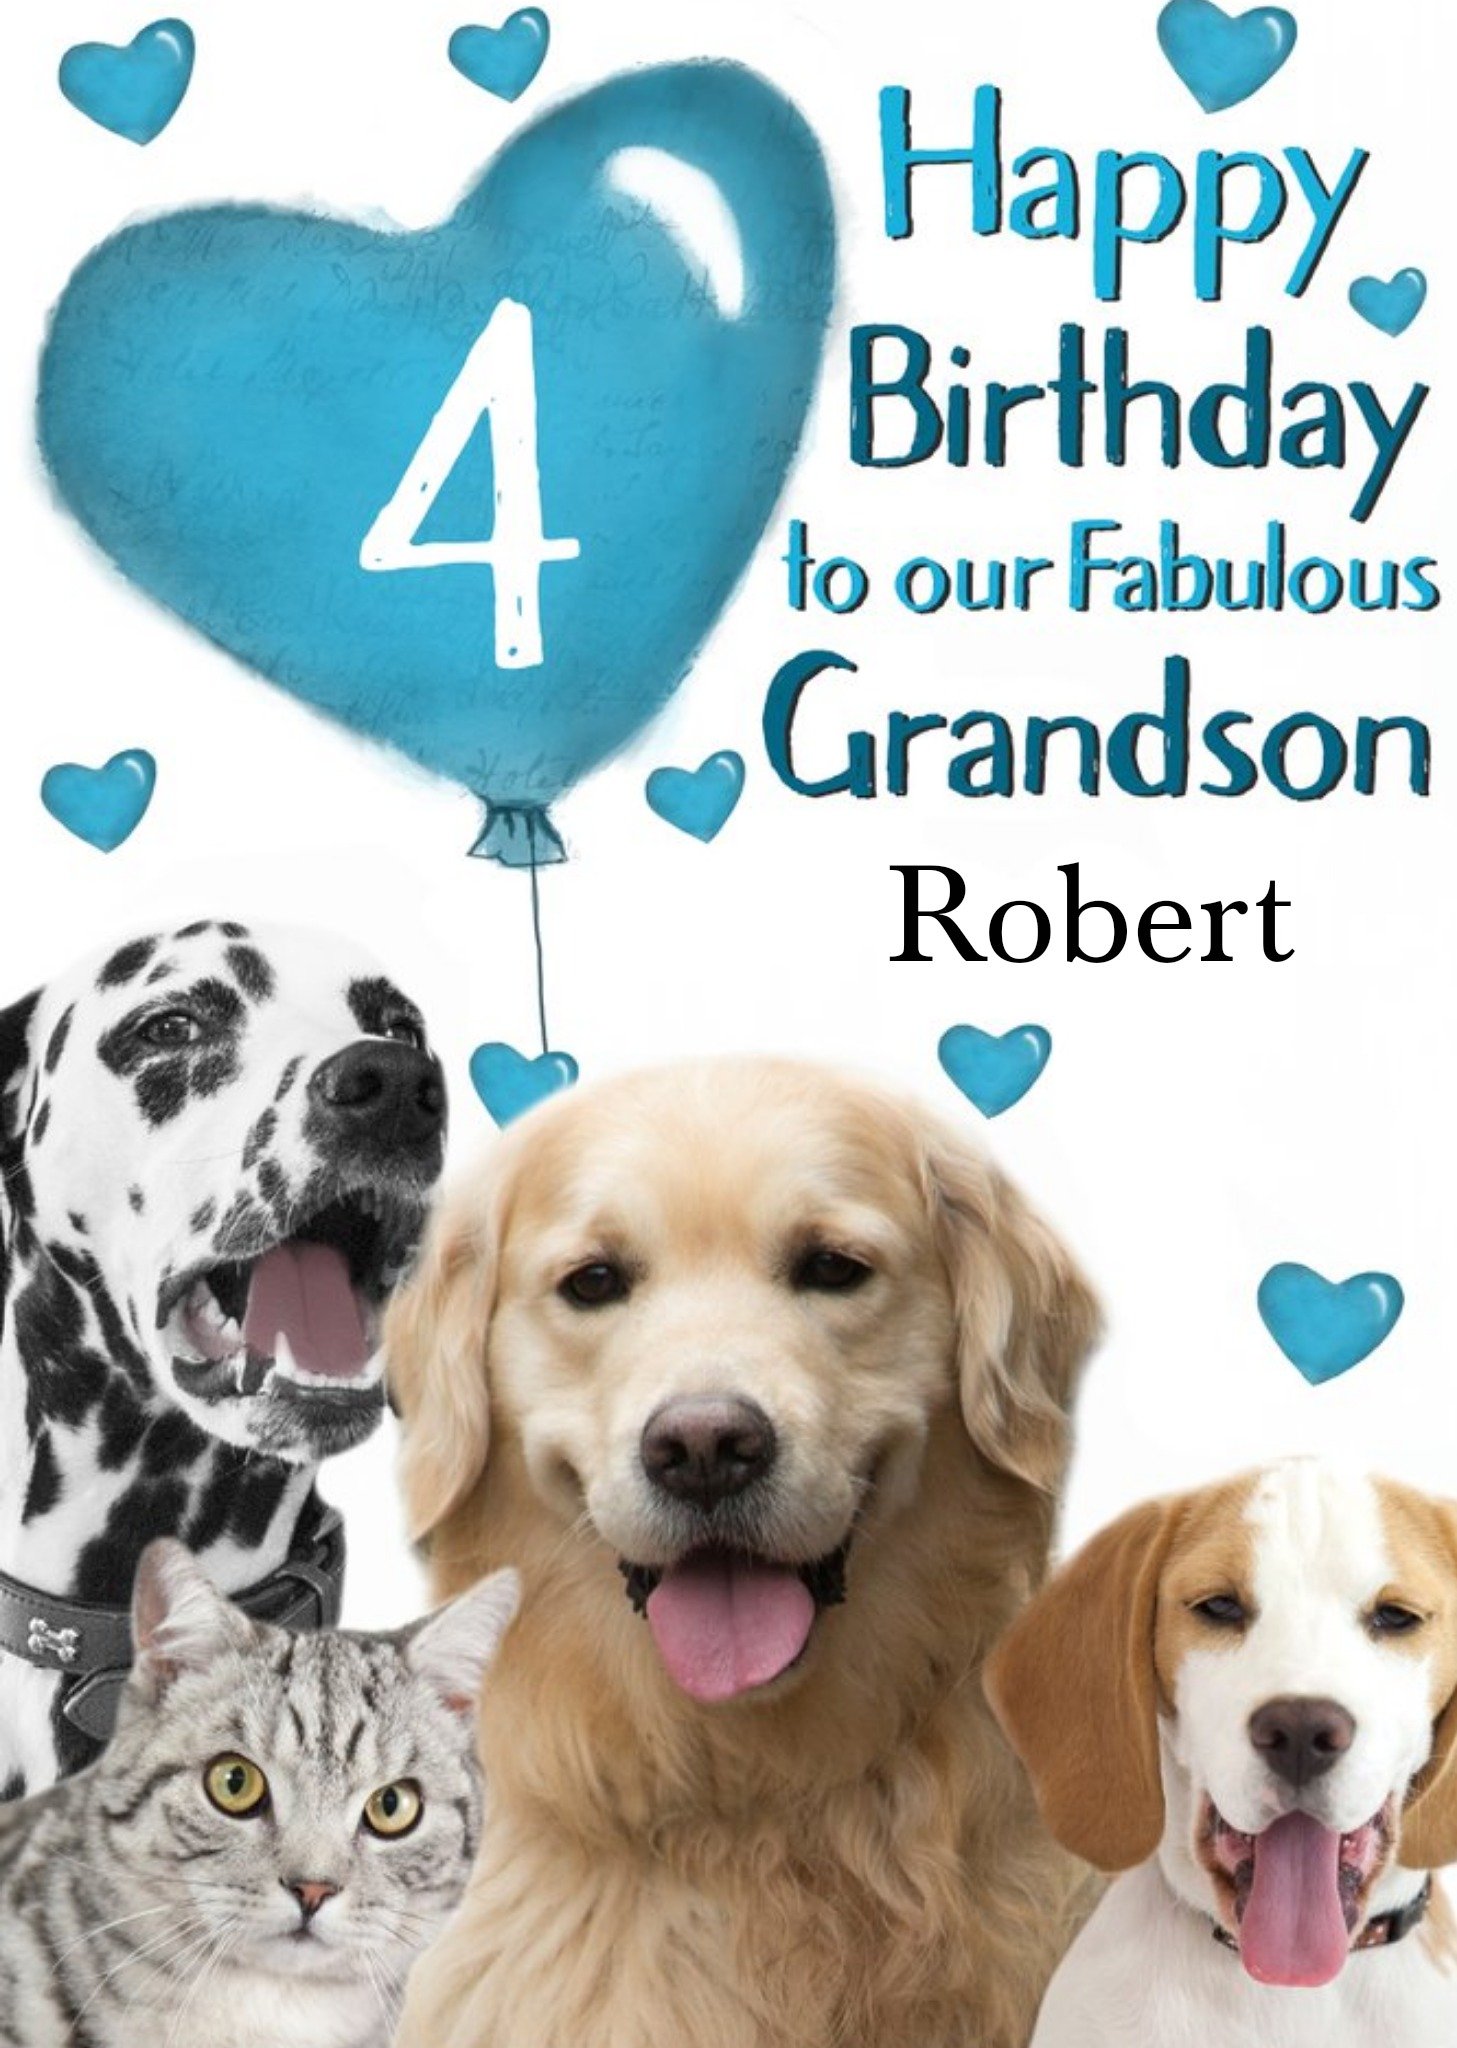 Moonpig Photo Of Cats And Dogs With Birthday Balloon Grandson 4th Birthday Card Ecard